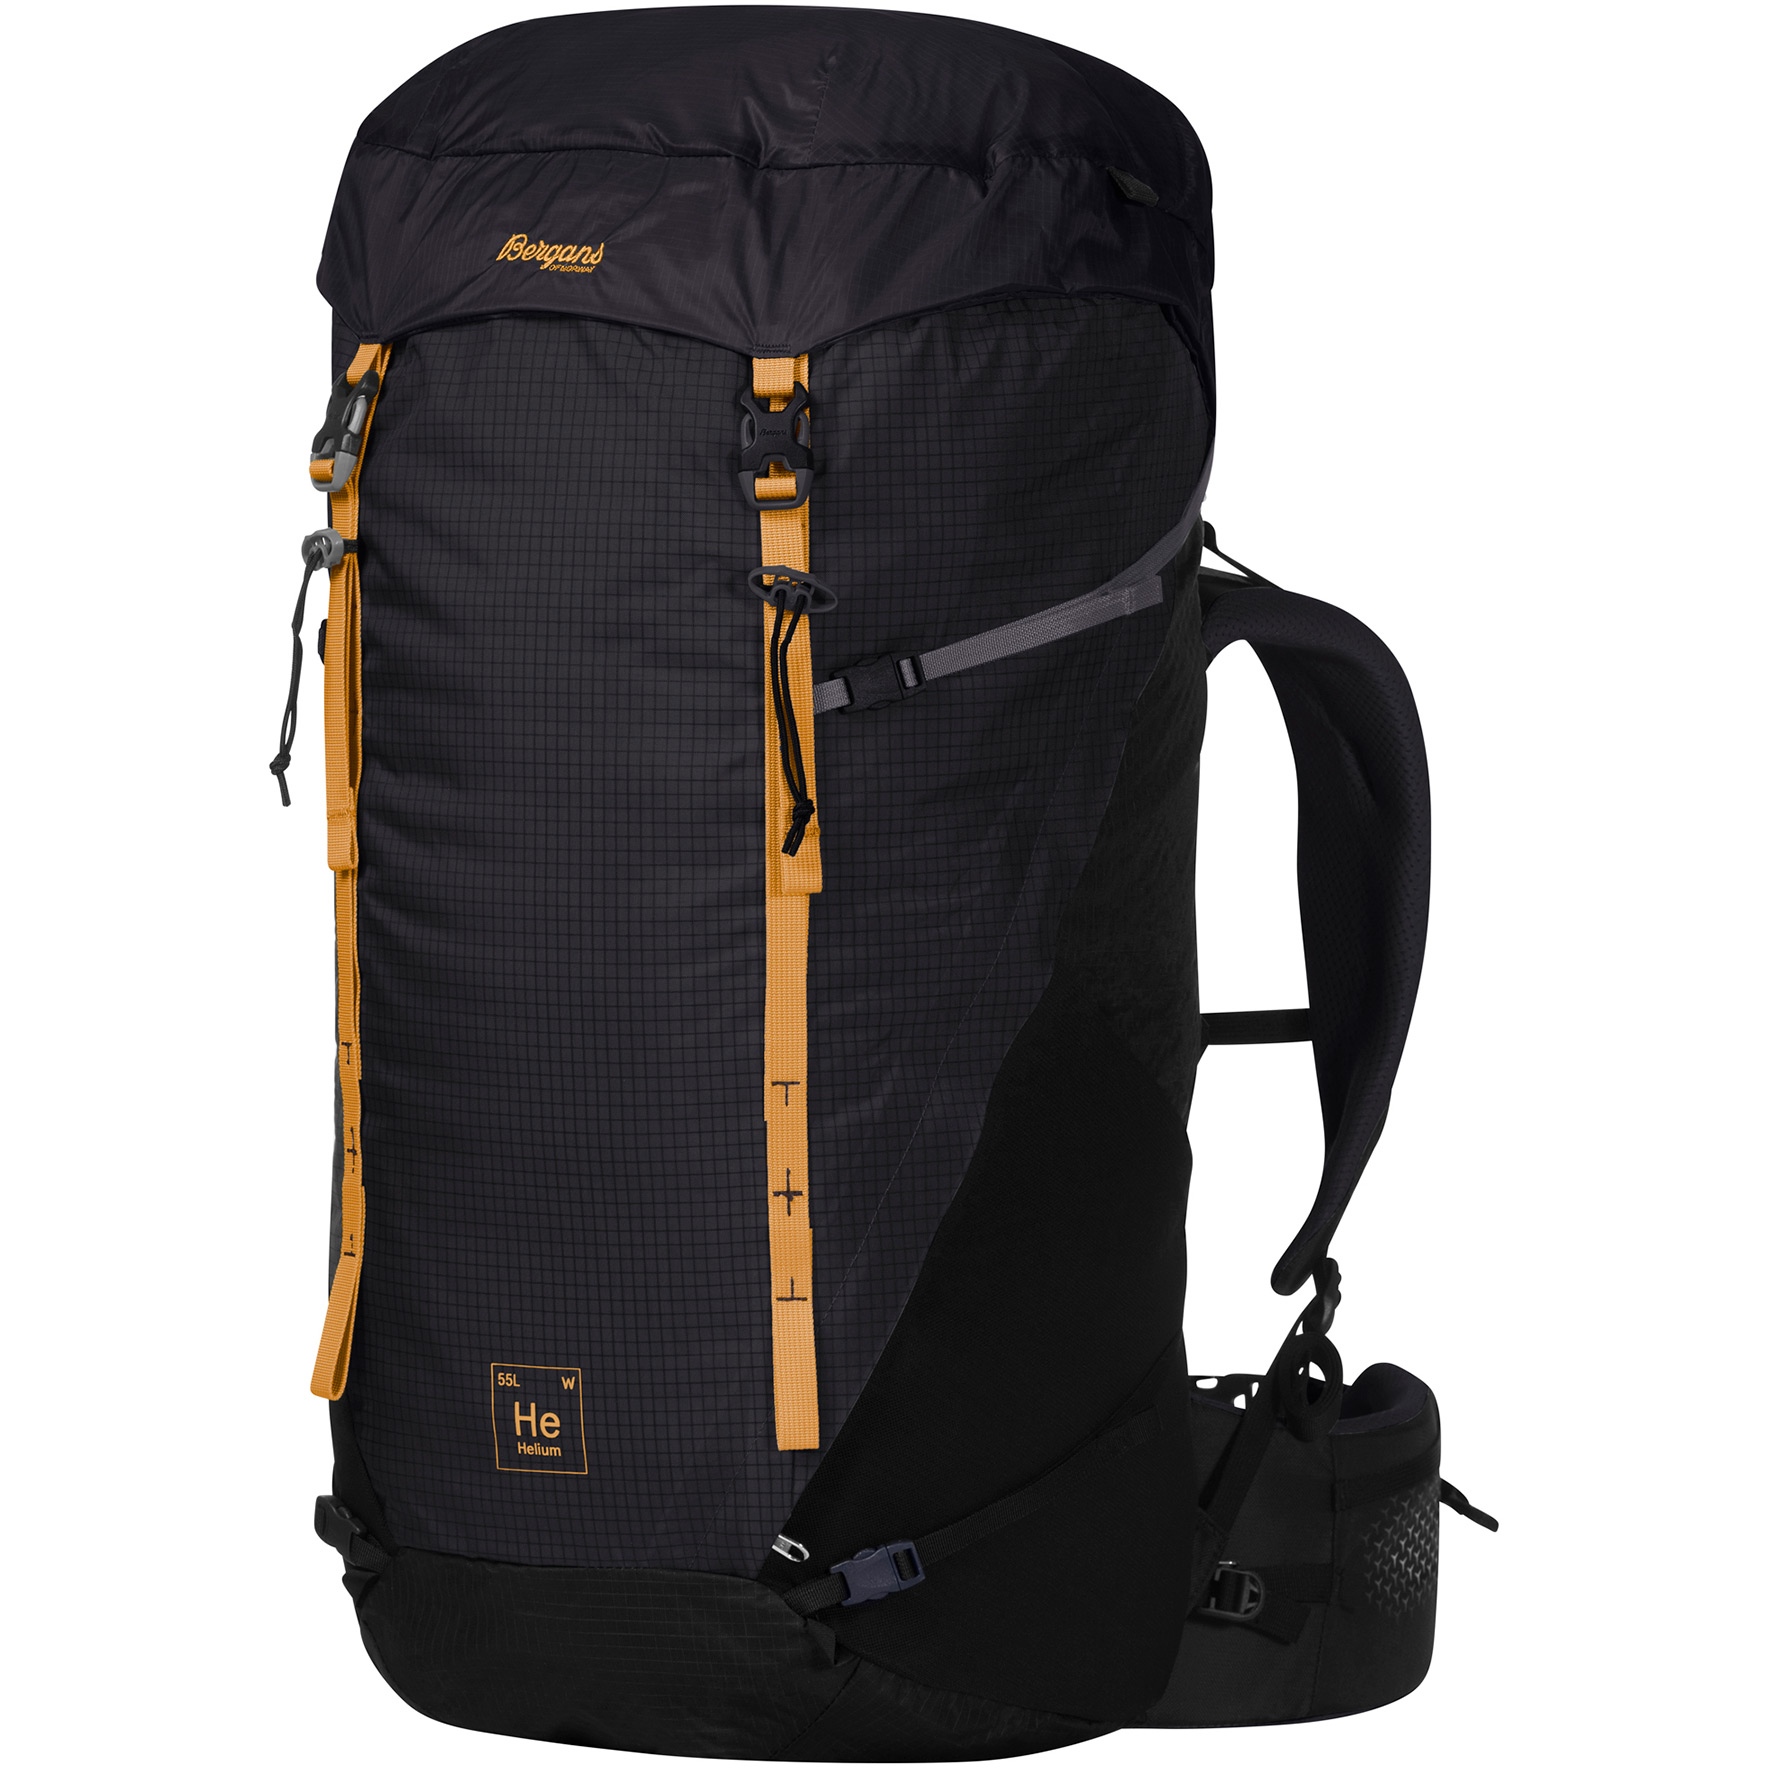 Picture of Bergans Helium V5 55L Backpack - dark shadow grey/black/golden yellow